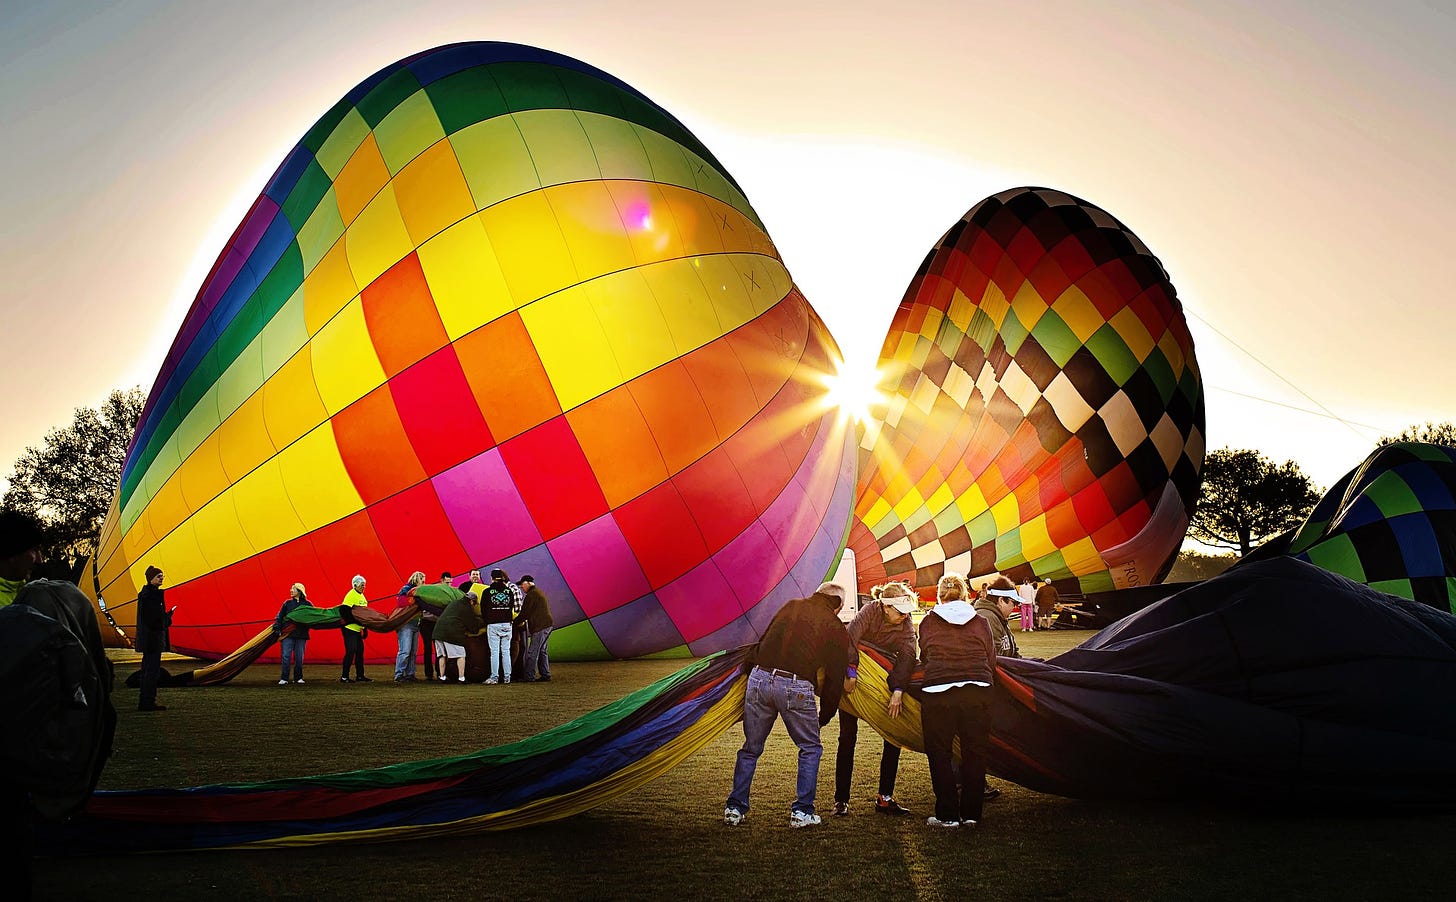 Multi-colored hot air balloons preparing to launch